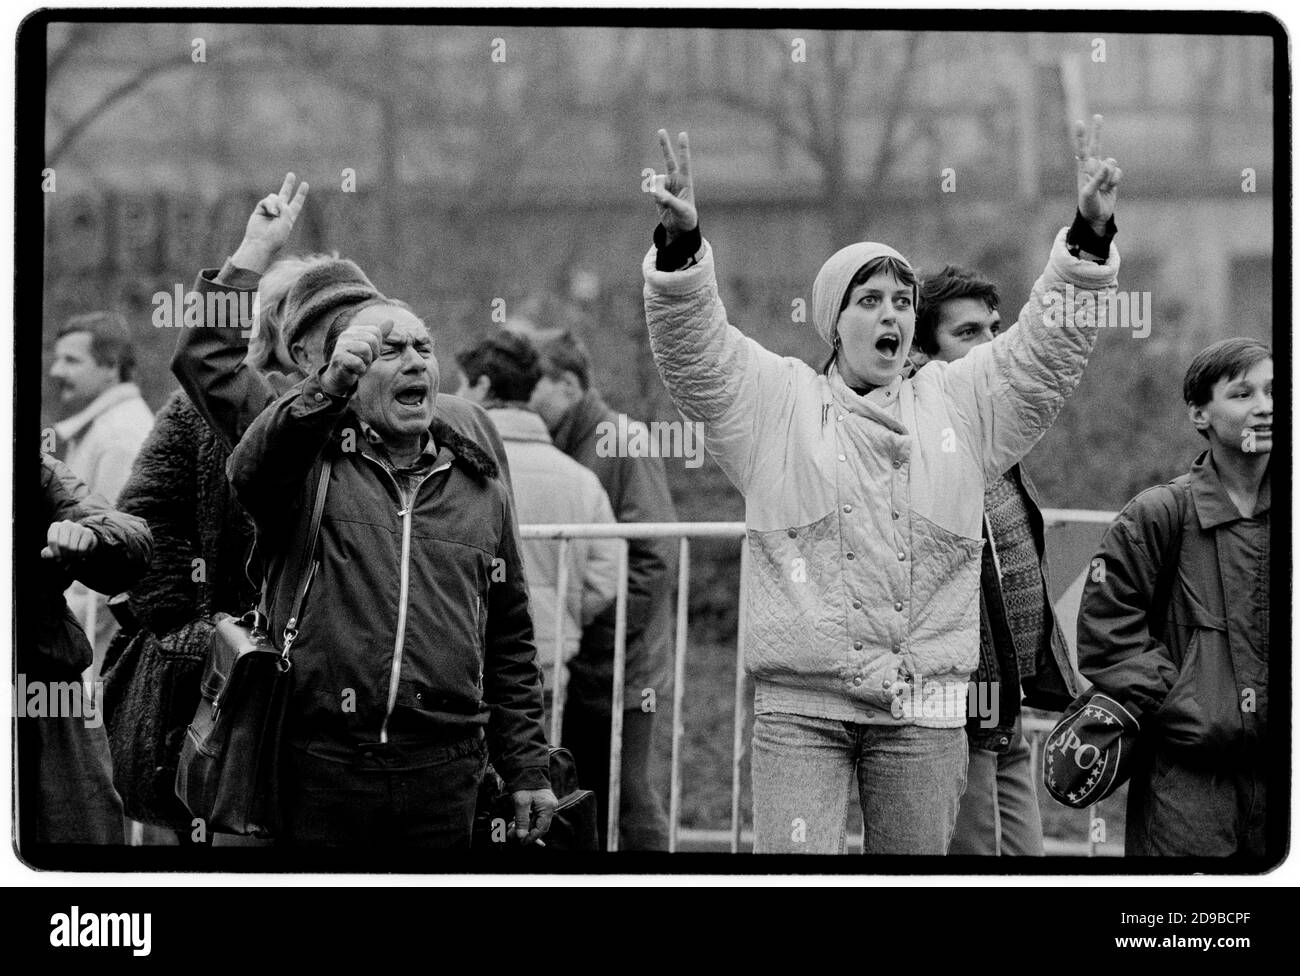 Czechoslovakia Velvet Revolution Prague November 1989 Scanned in 2020 Celebrating and supporting the thousands of protesters in Wenceslas Square during the Velvet Revolution. Wikipedia: The Velvet Revolution (Czech: sametová revoluce) or Gentle Revolution (Slovak: nežná revolúcia) was a non-violent transition of power in what was then Czechoslovakia, occurring from 17 November to 29 December 1989. Popular demonstrations against the one-party government of the Communist Party of Czechoslovakia included students and older dissidents. The result was the end of 41 years of one-party rule in Czecho Stock Photo